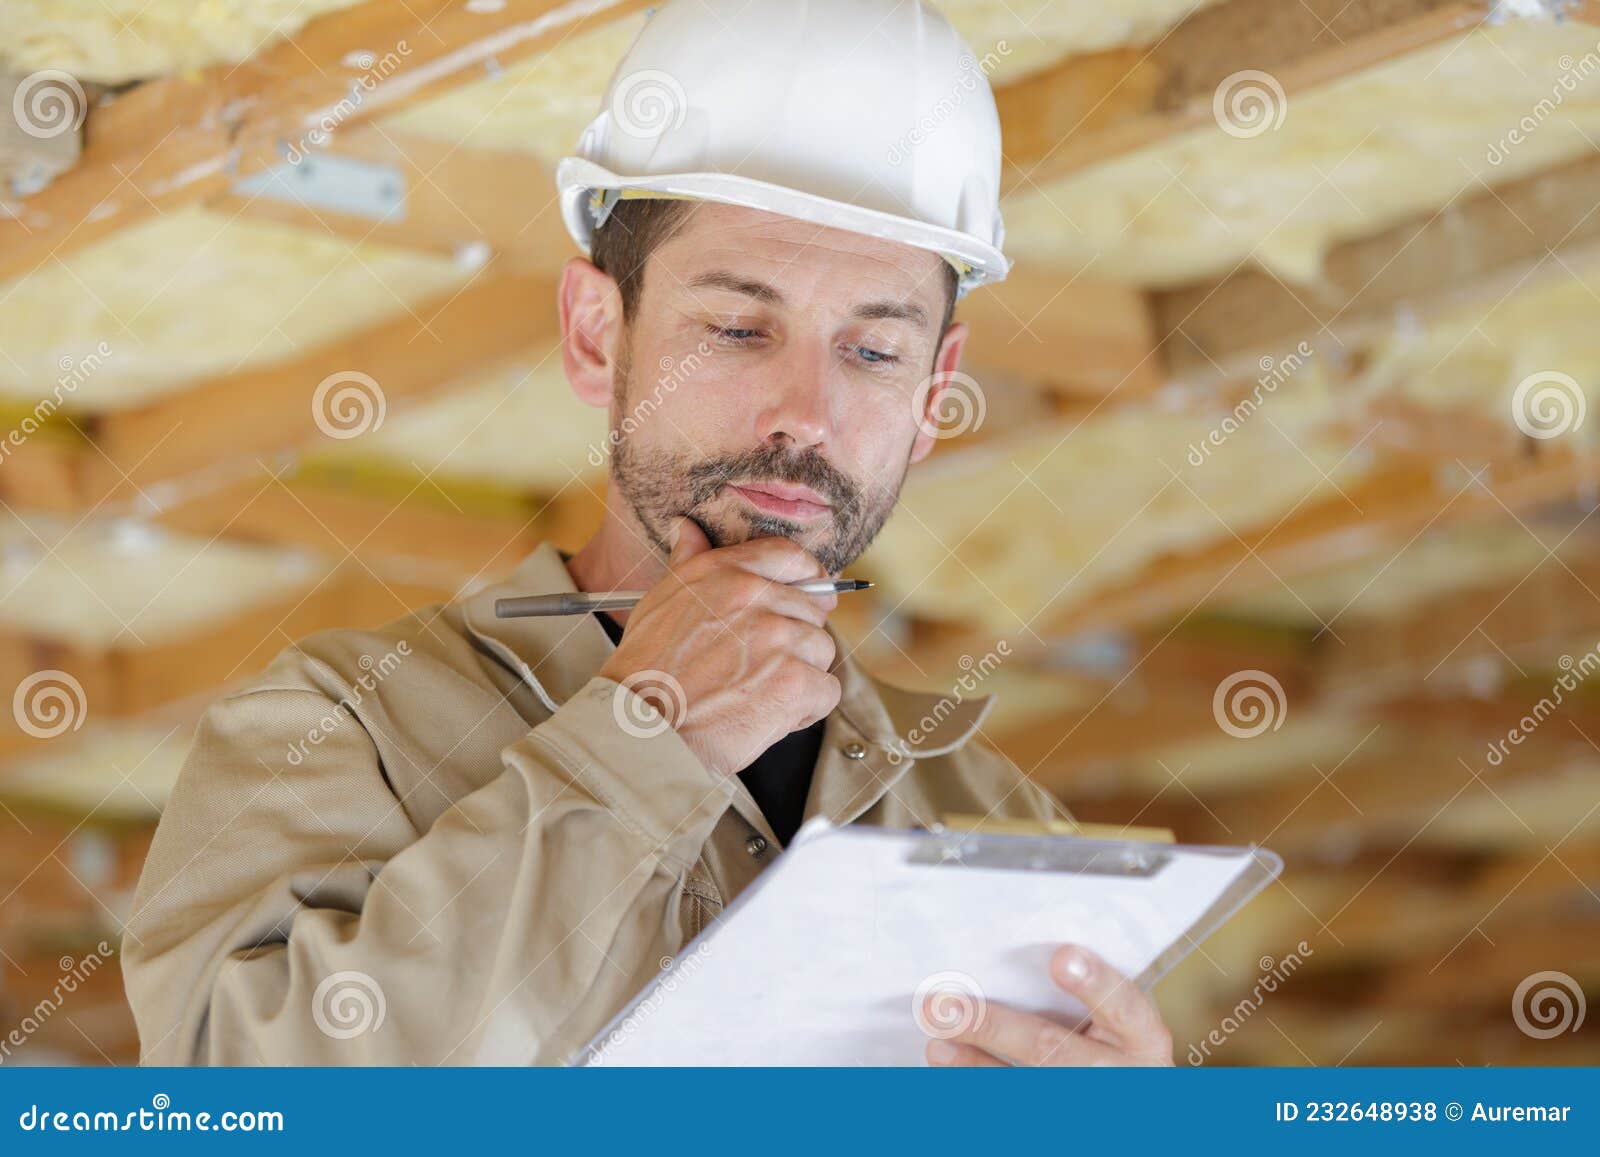 male builder looking at clipboard